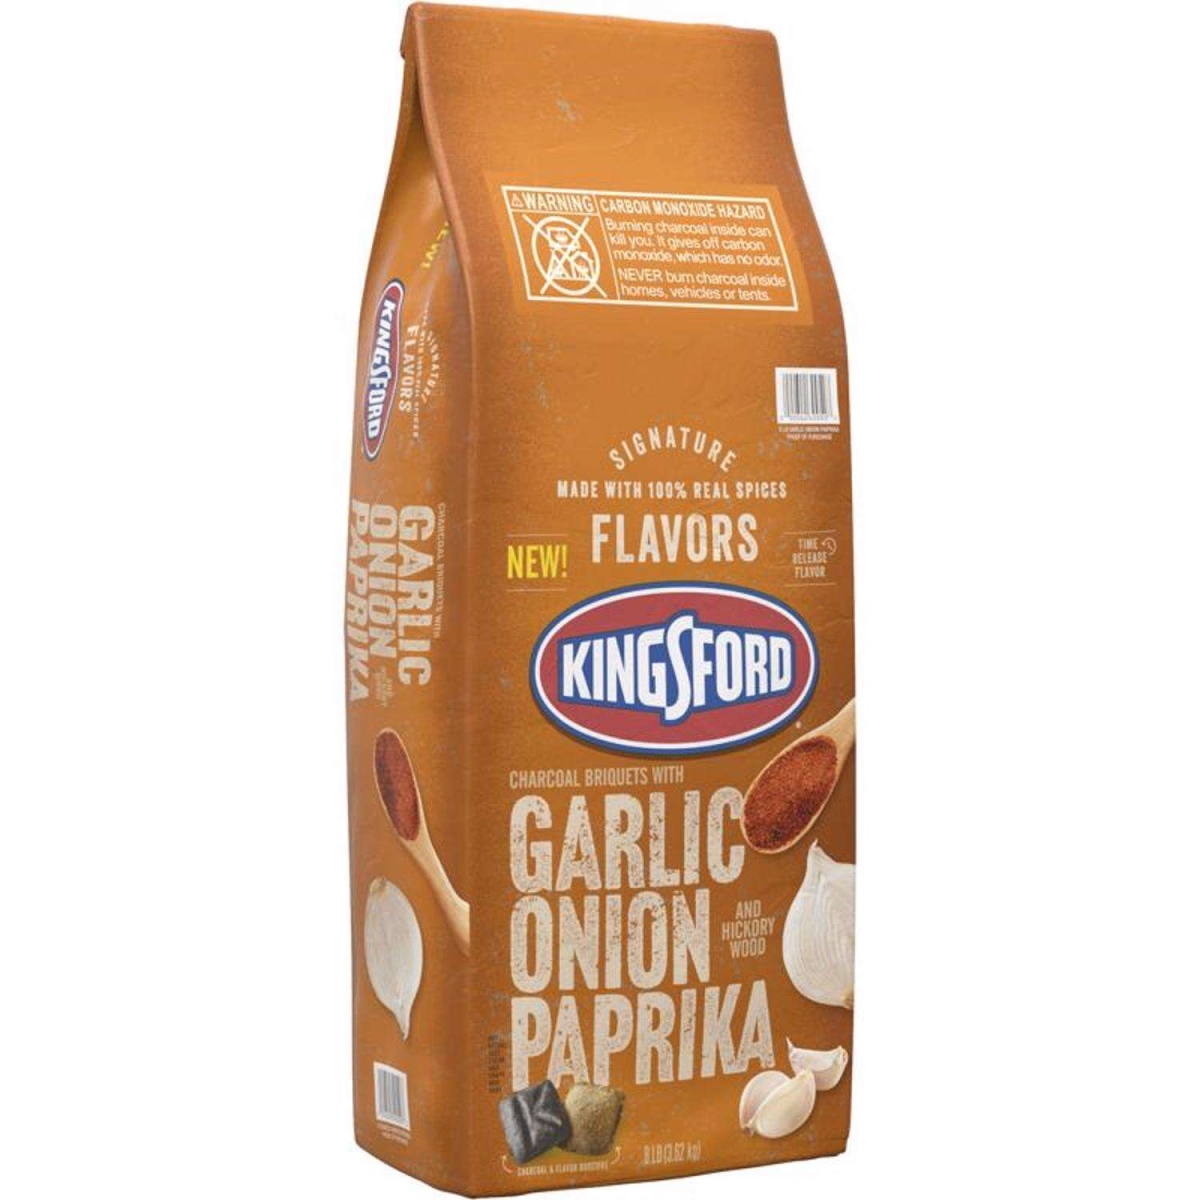 Picture of Kingsford 103065 8 lbs Signature Flavors Charcoal Briquets with Garlic&#44; Onion Paprika & Hickory